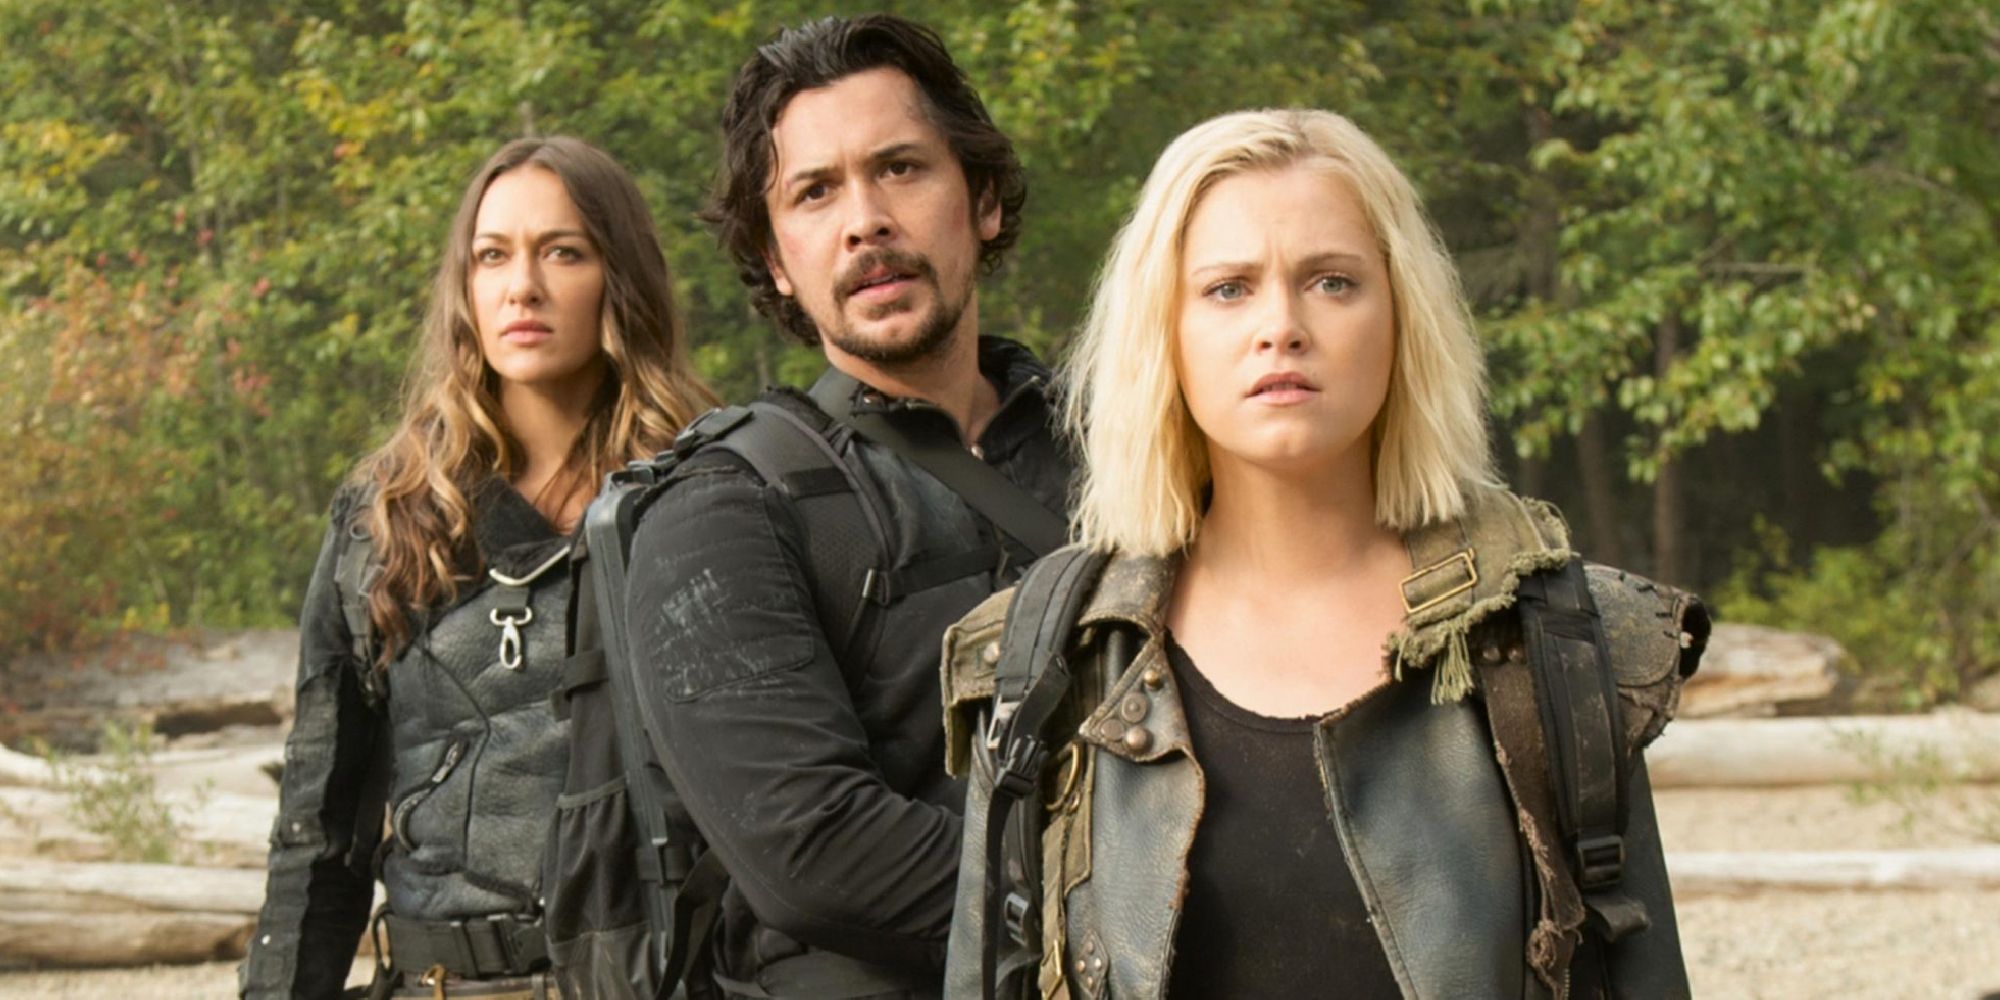 Clarke Griffin looks forward while Bellamy Blake and Echo stand behind her in the CW series, The 100.